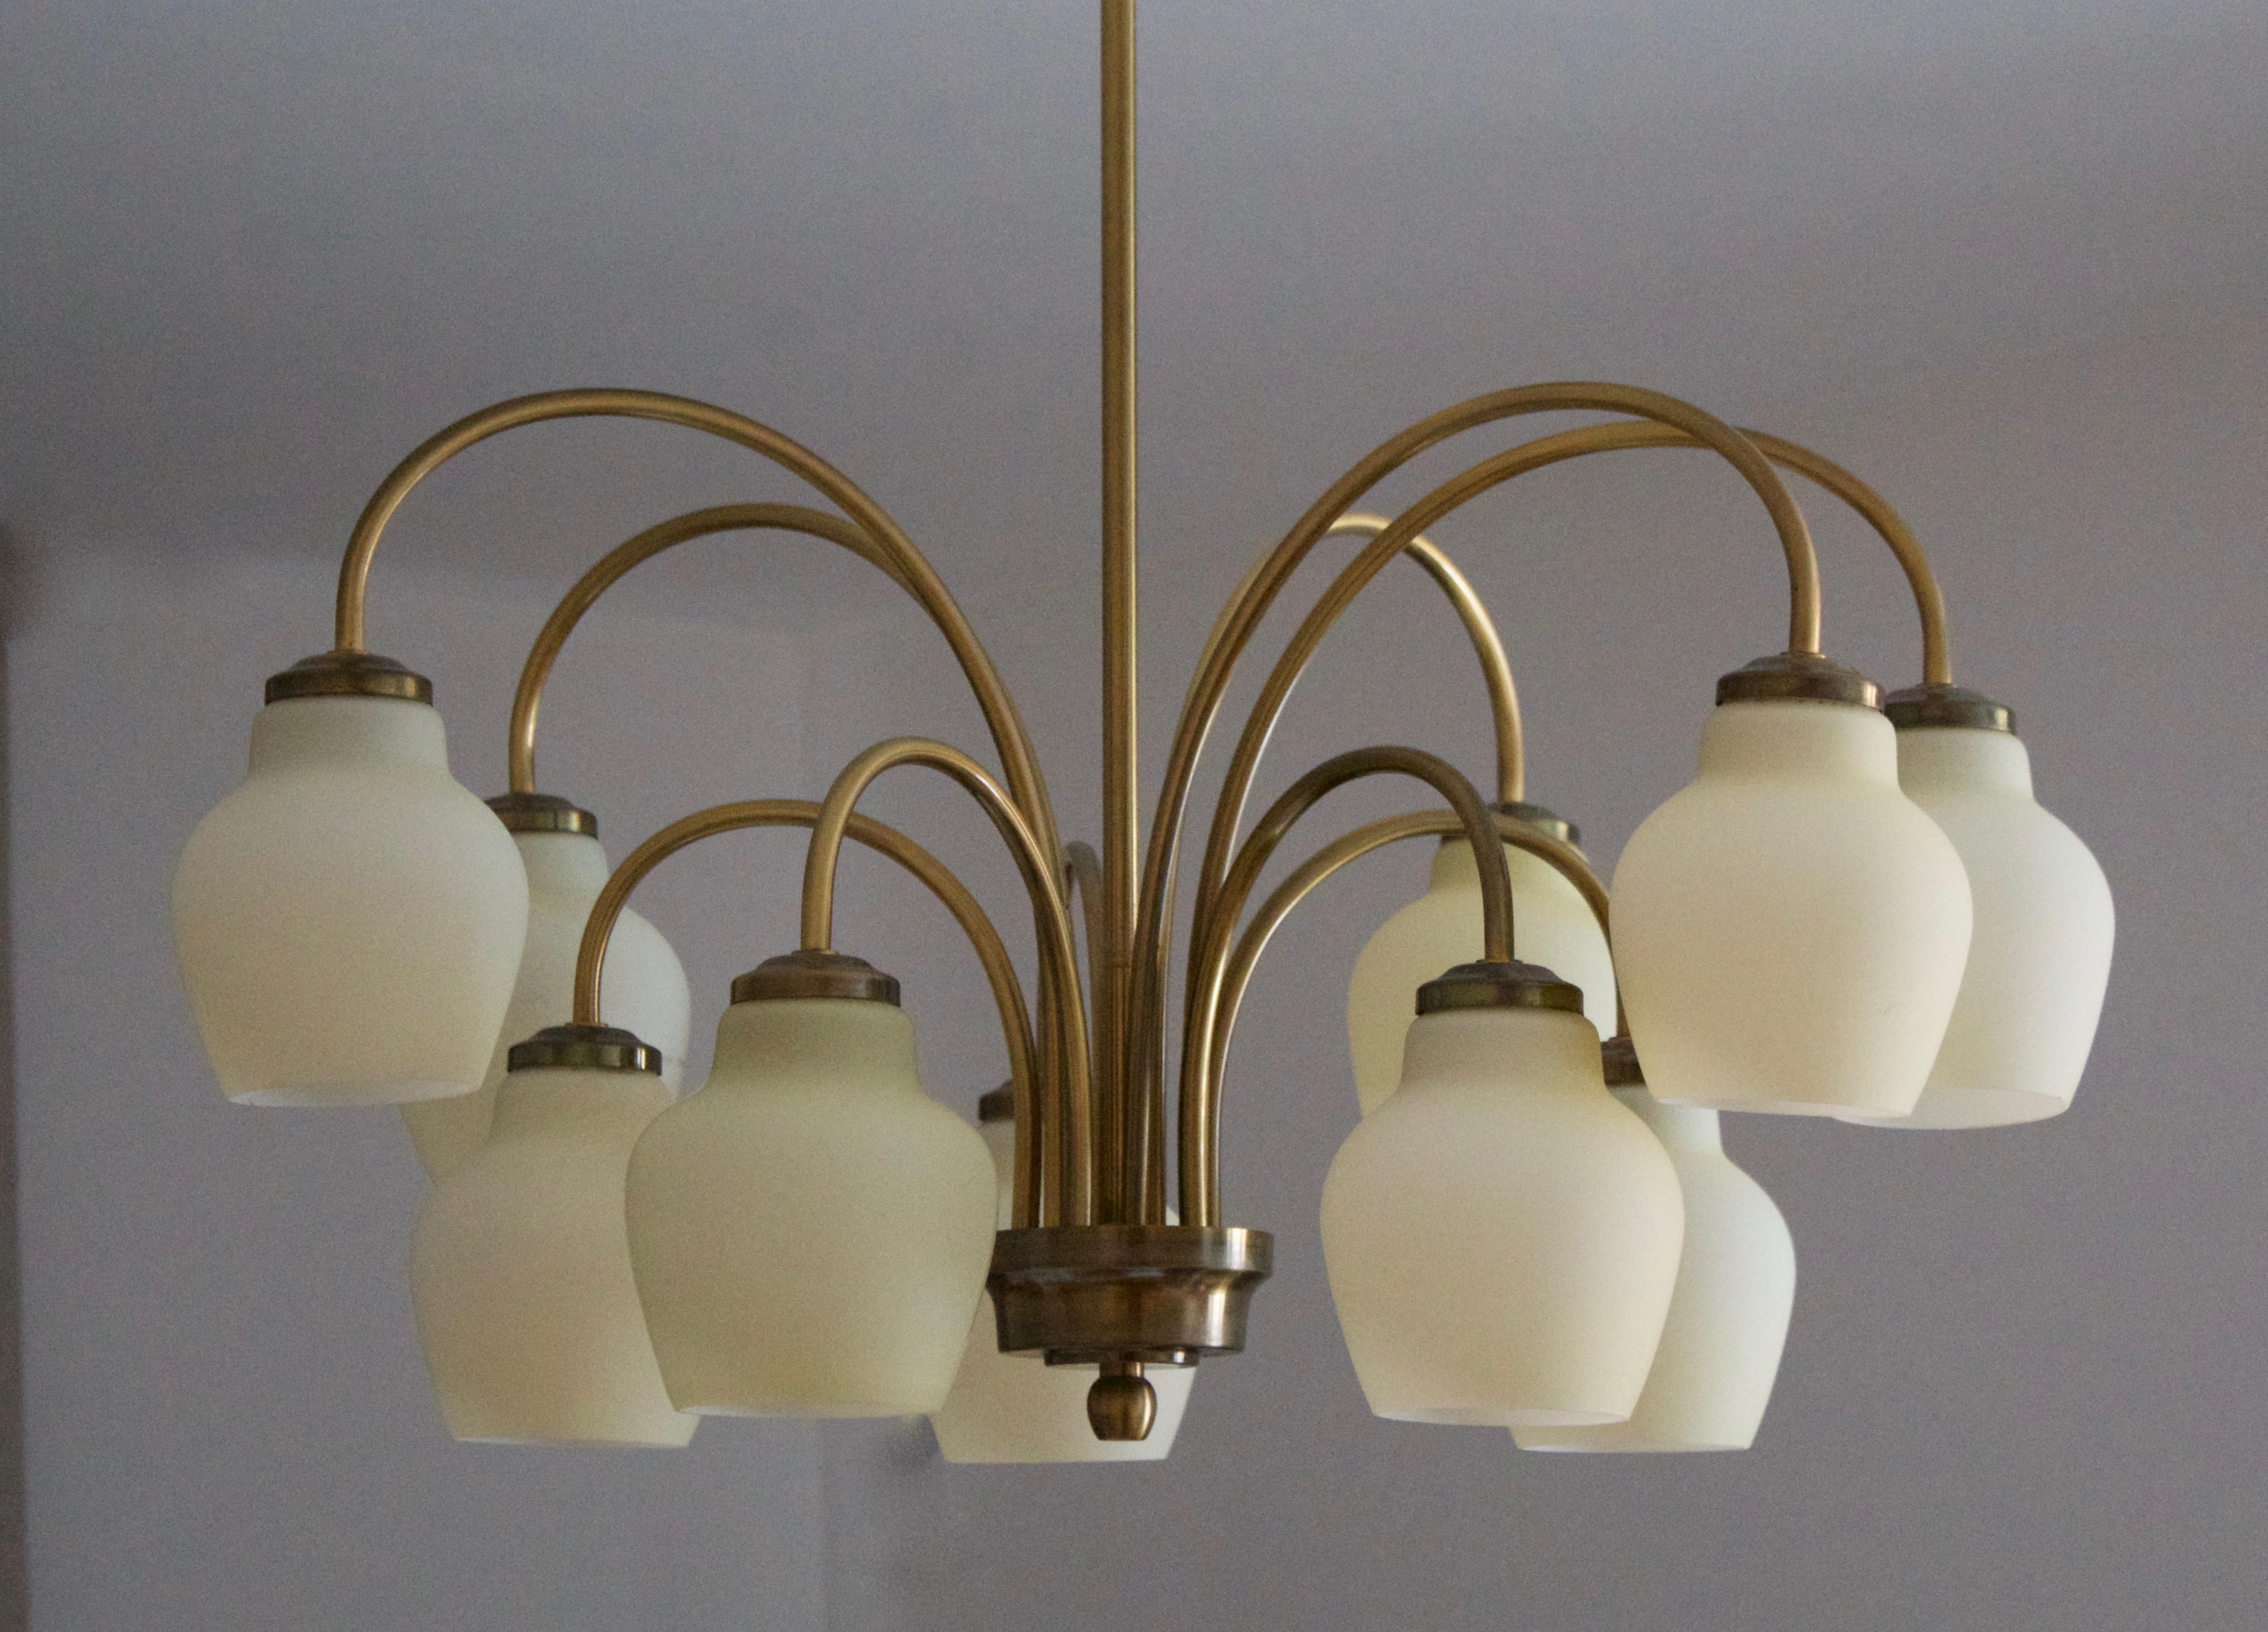 A sizable 10-armed chandelier light. Produced by Fog & Mørup, Denmark, 1930s-1940s.

In brass, featuring its original milk glass difussers.